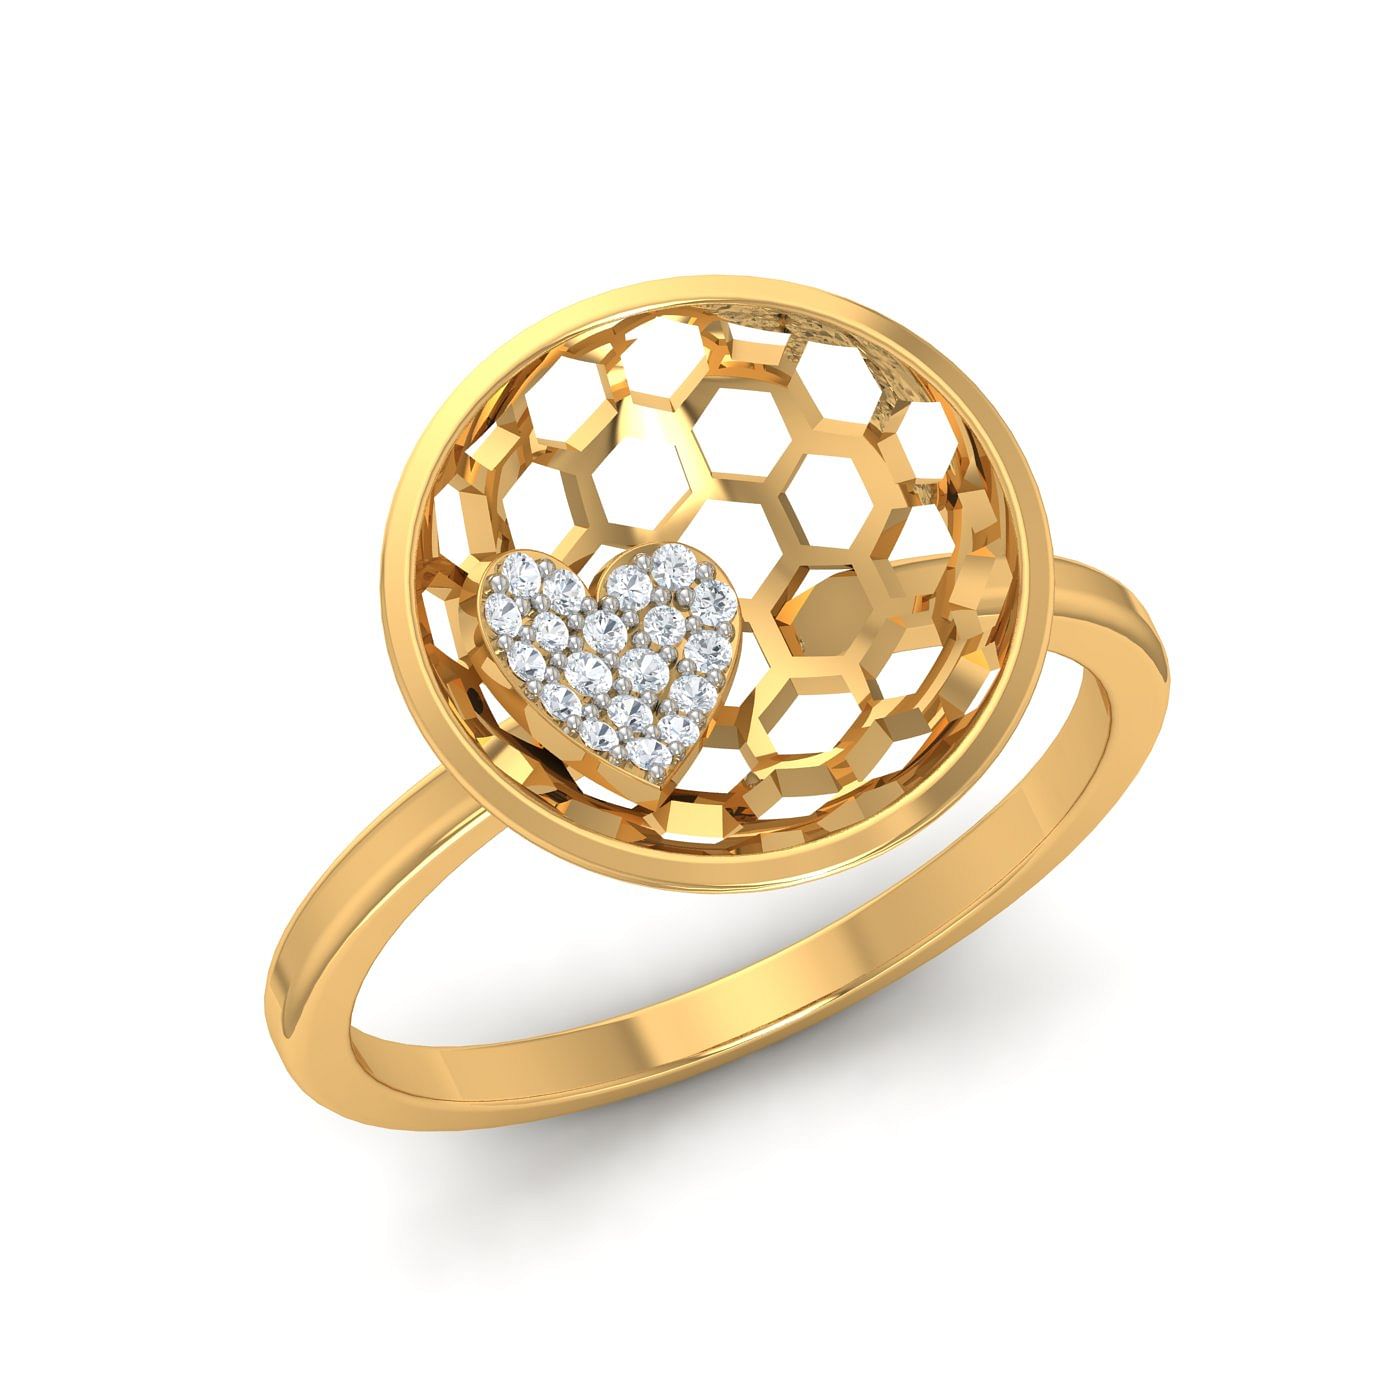 Heart Shape Design Diamond Ring With Yellow Gold For Women